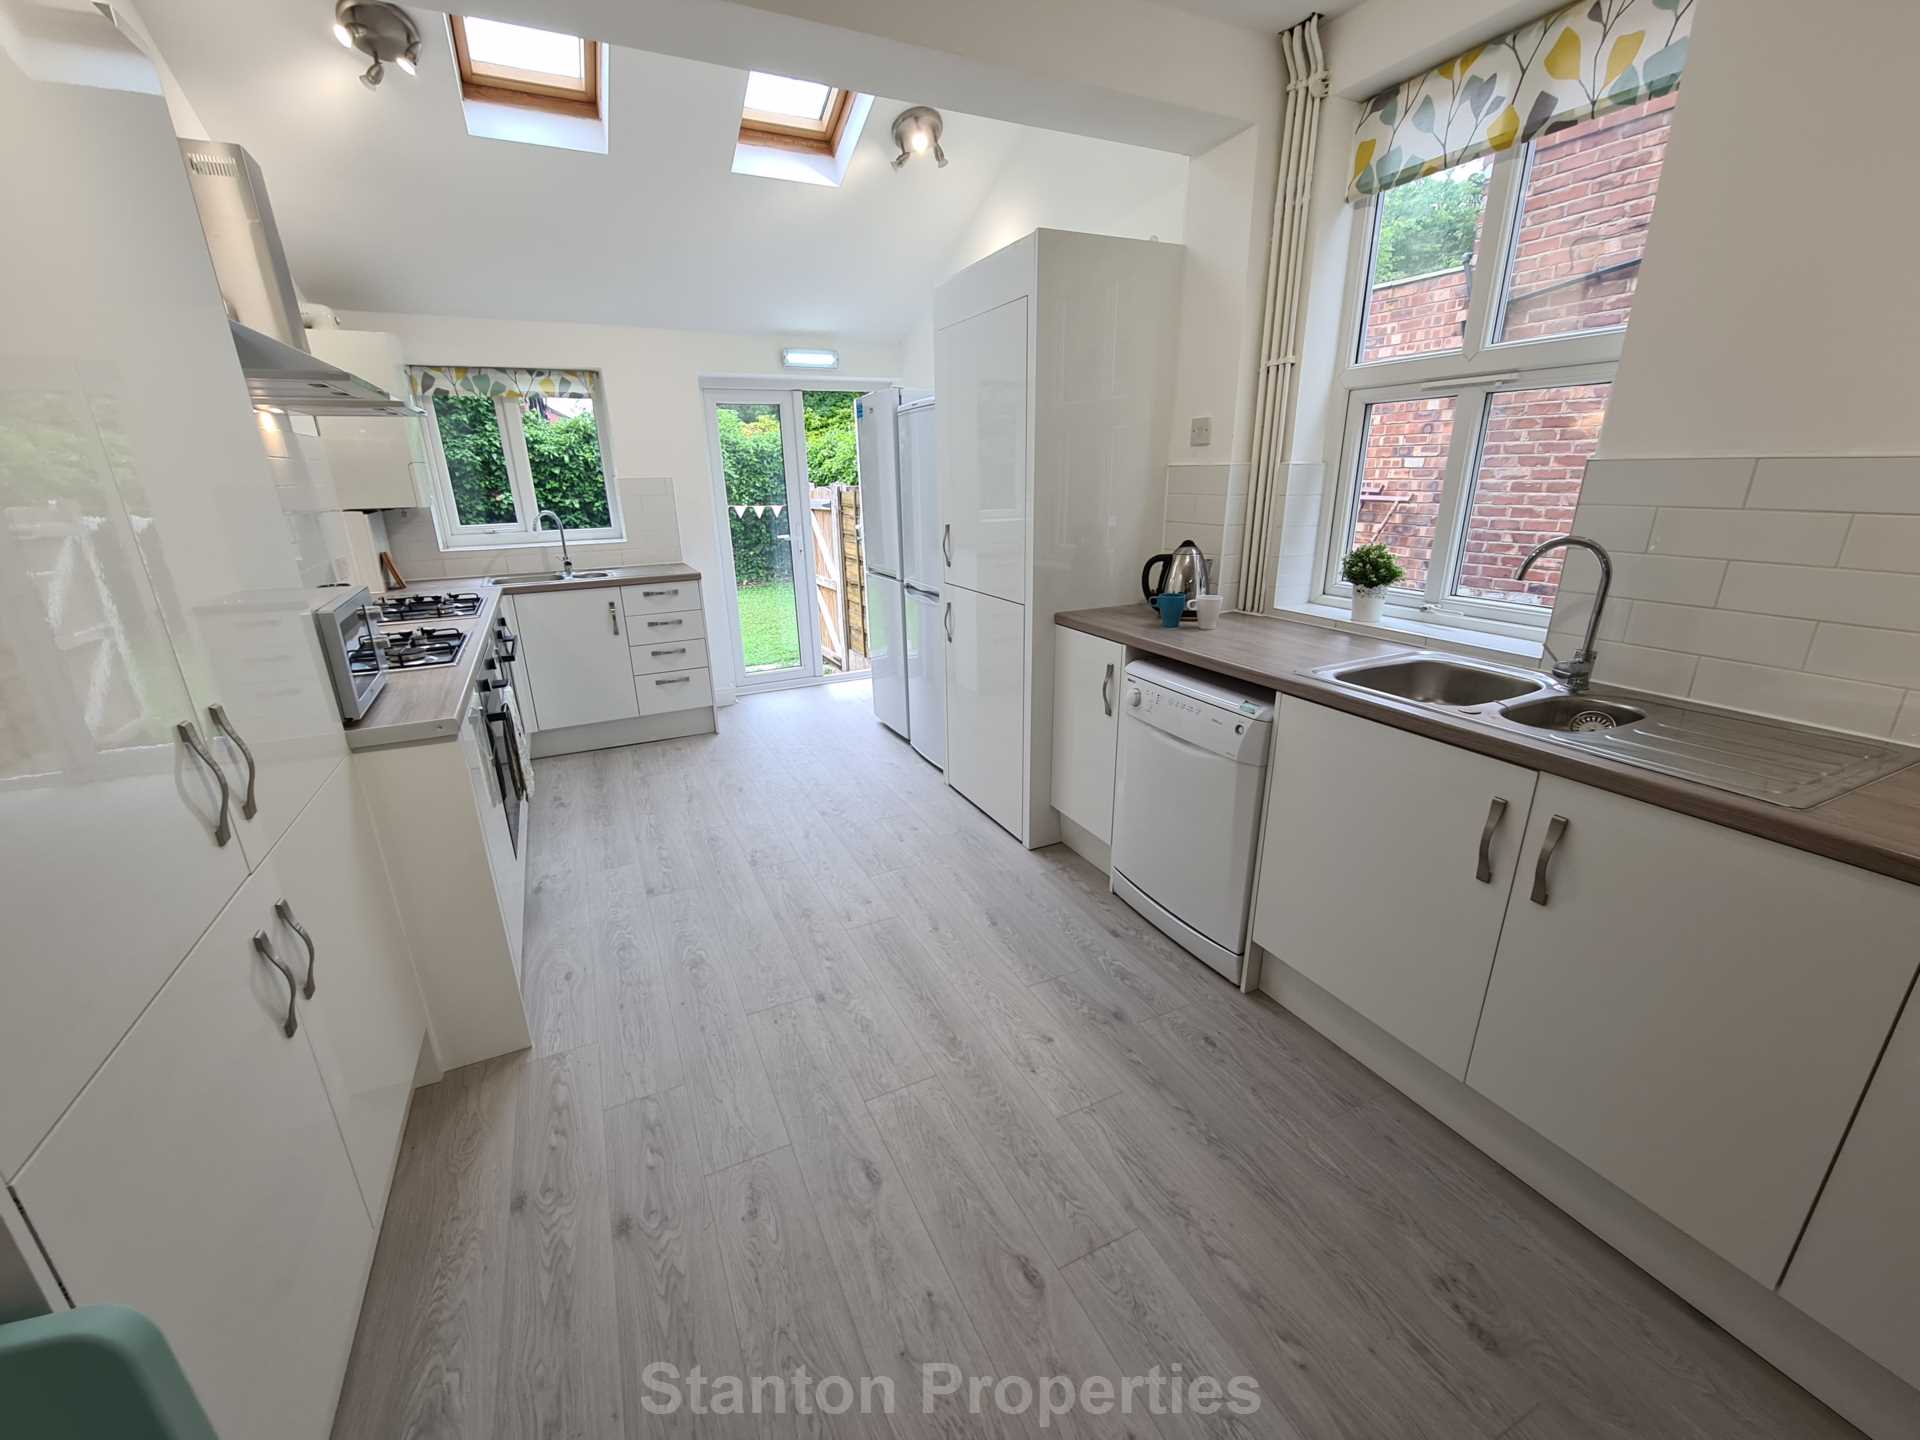 £145 pppw, See Video Tour, Wellington Road, Fallowfield, Image 10